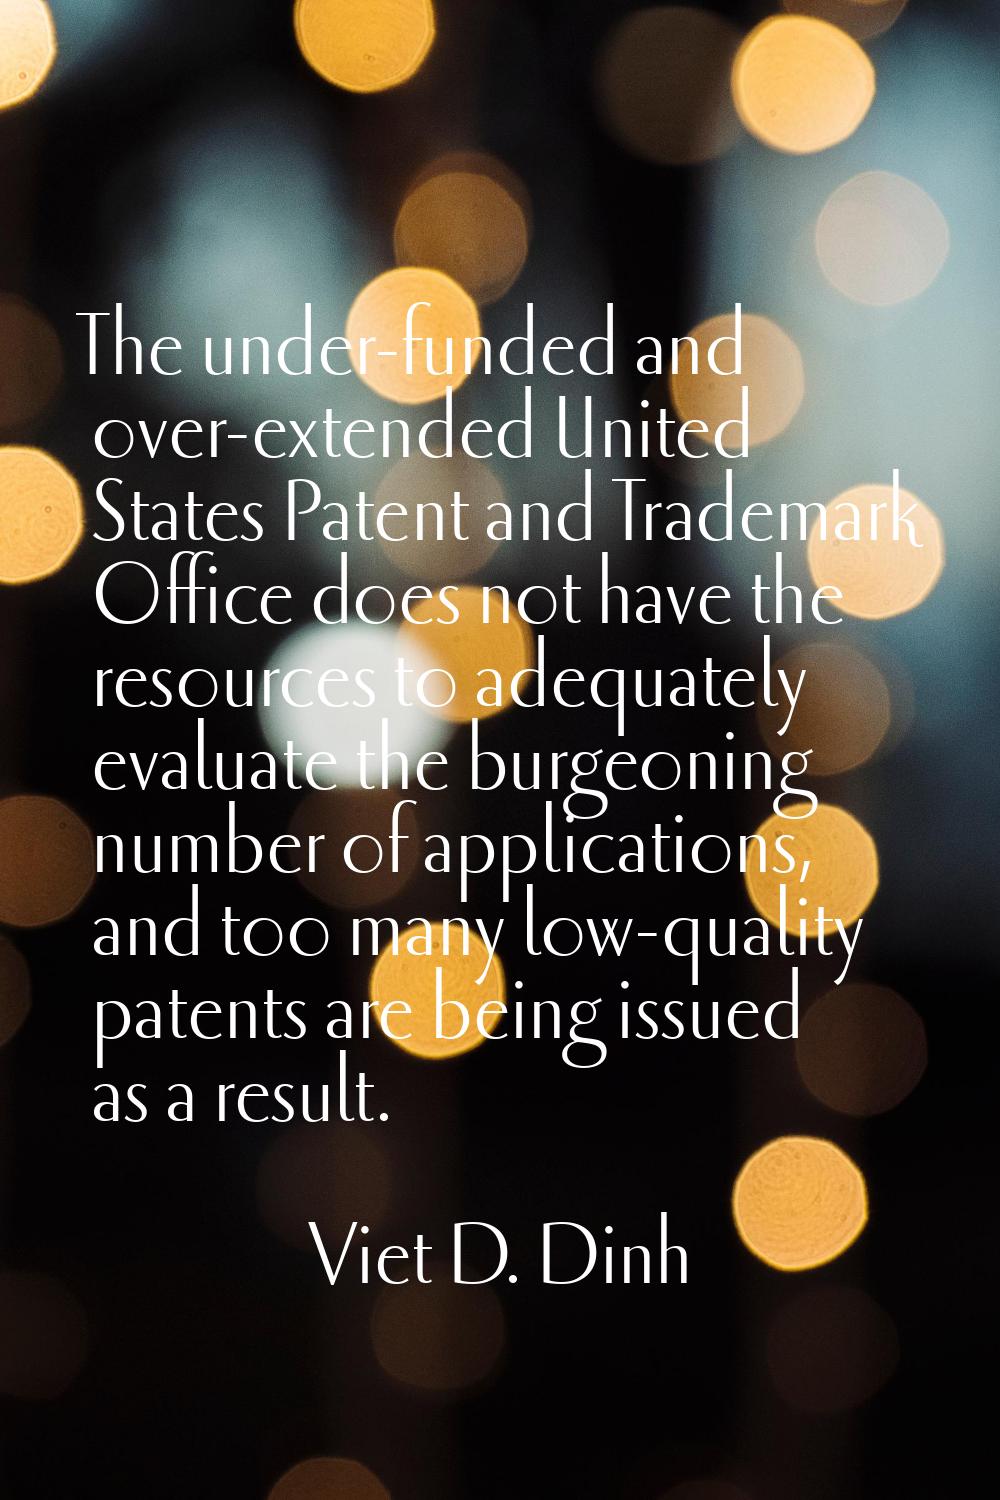 The under-funded and over-extended United States Patent and Trademark Office does not have the reso